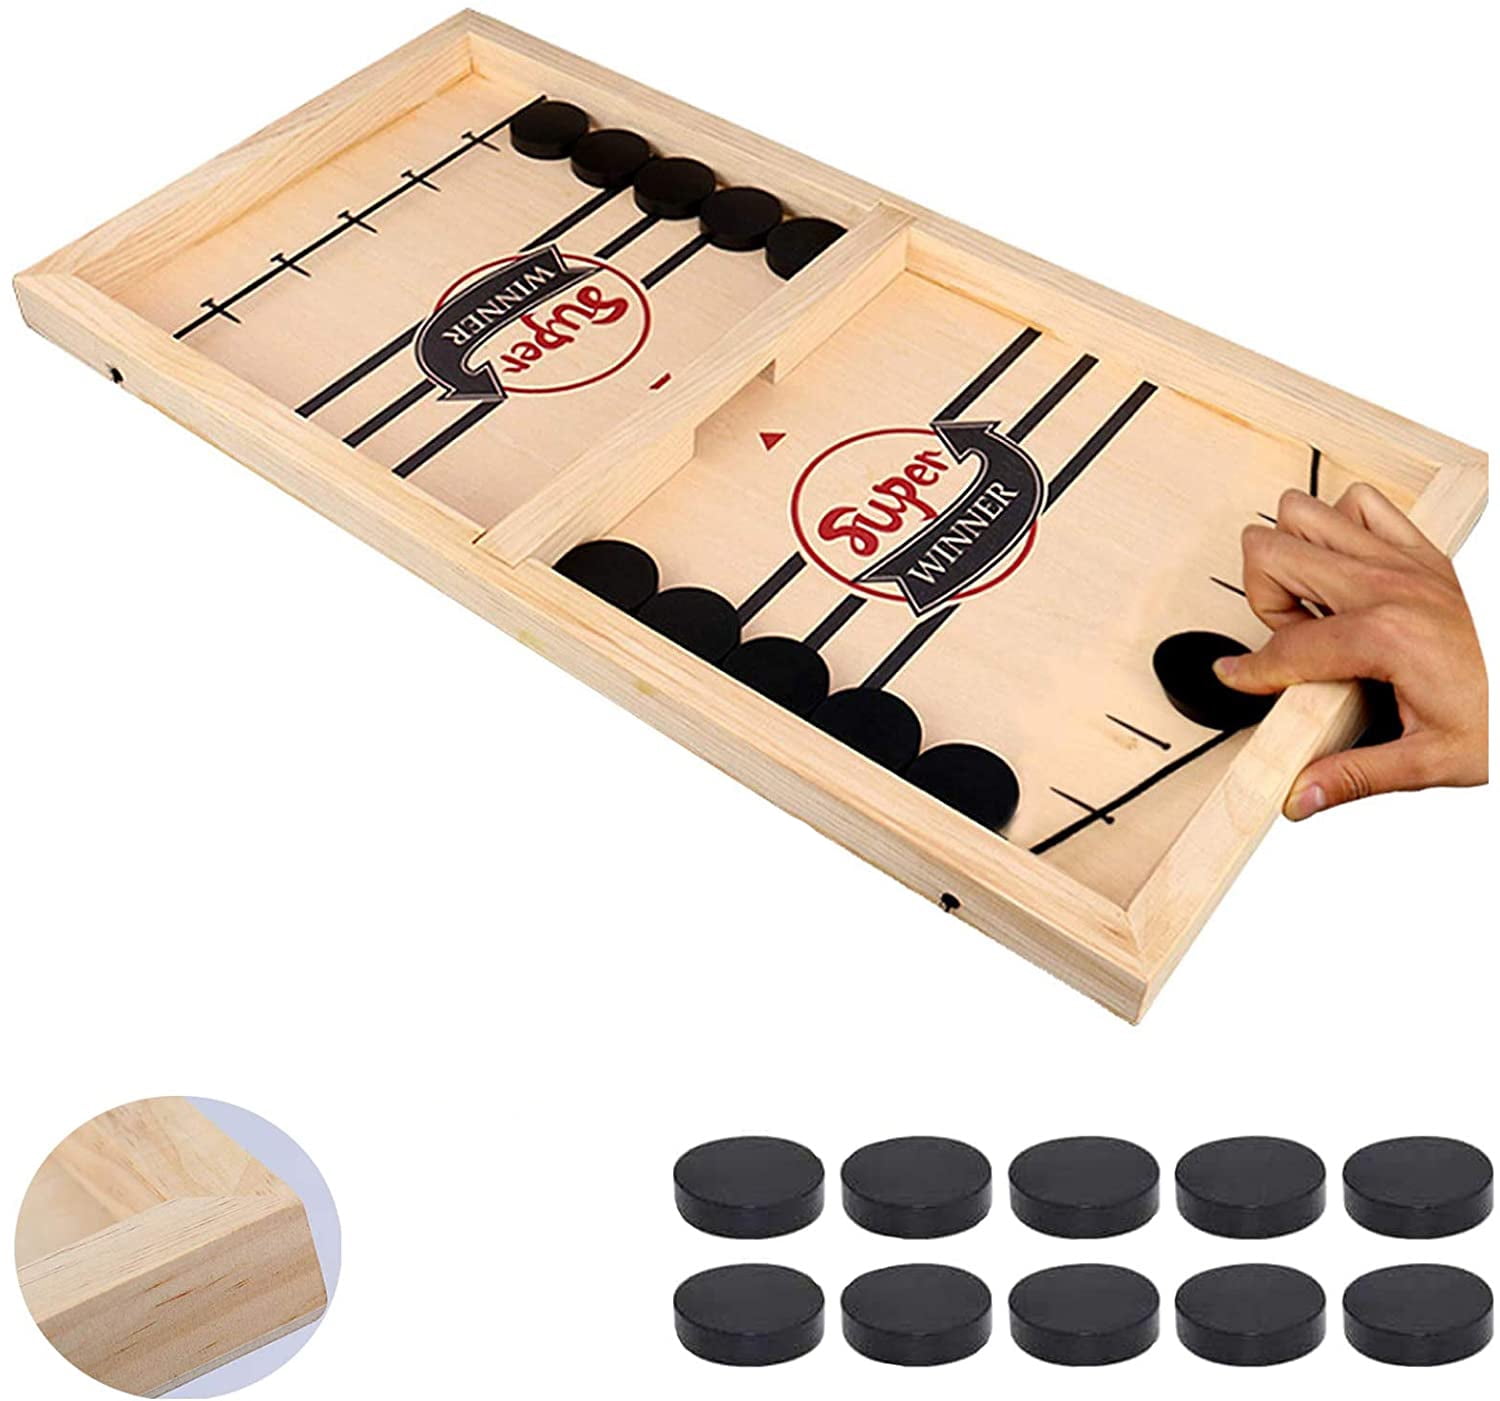 Large Size Fast Sling Puck Game Sling Foosball with 20 Pucks Portable Slingpuck Board Games for Adult and Kids Foosball Slingshot Outdoor Camping Table Hockey Party Games for Family（Classic）